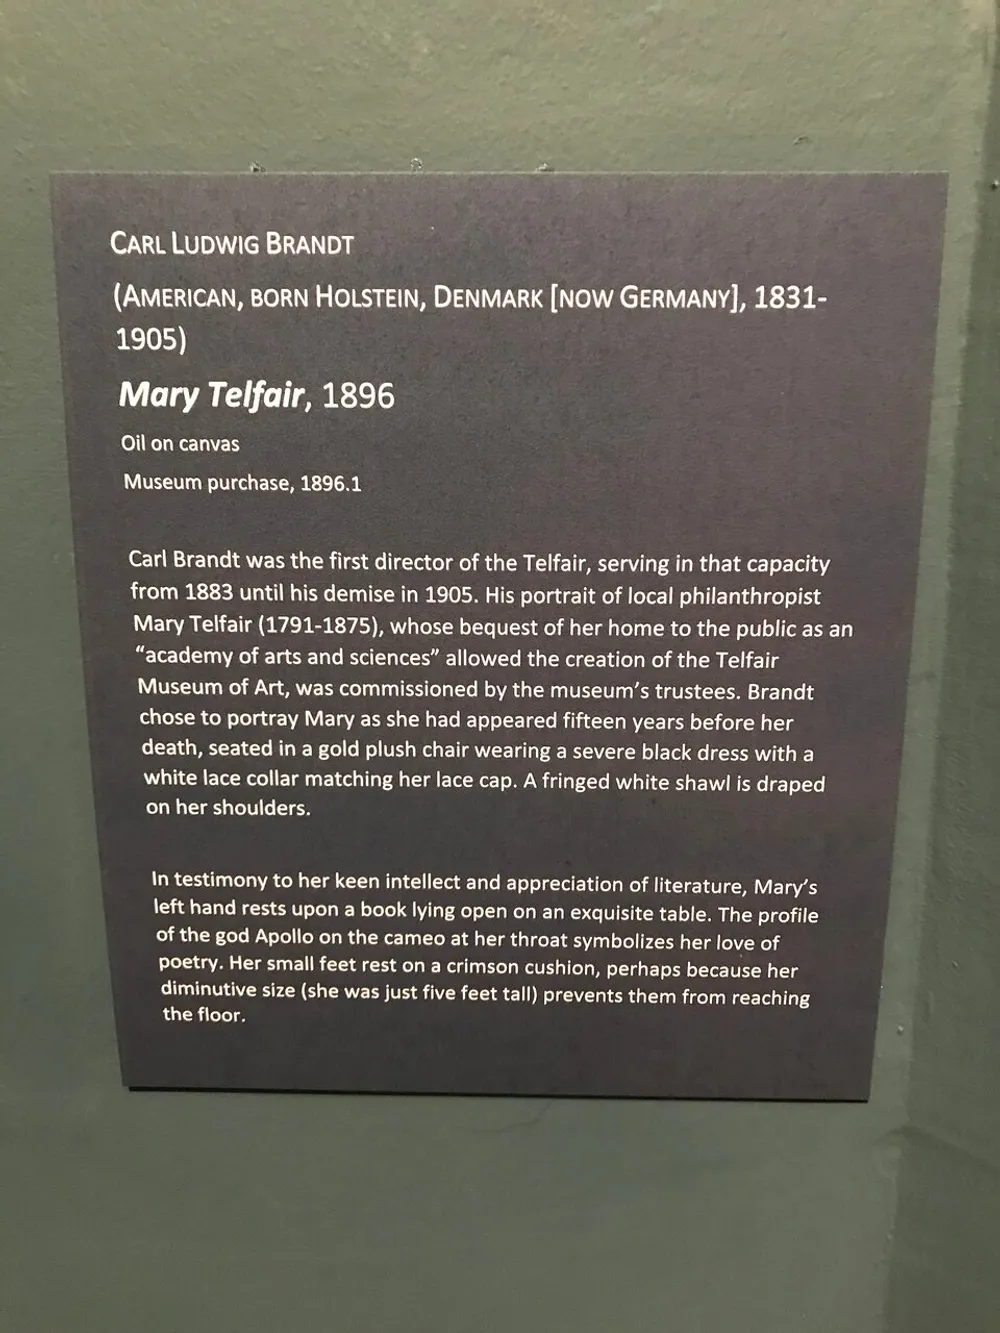 The image shows a plaque describing the artwork Mary Telfair painted in 1896 by Carl Ludwig Brandt detailing its background the artists tenure as the first director of the Telfair museum and the elements of the portrait that reflect Mary Telfairs character and interests